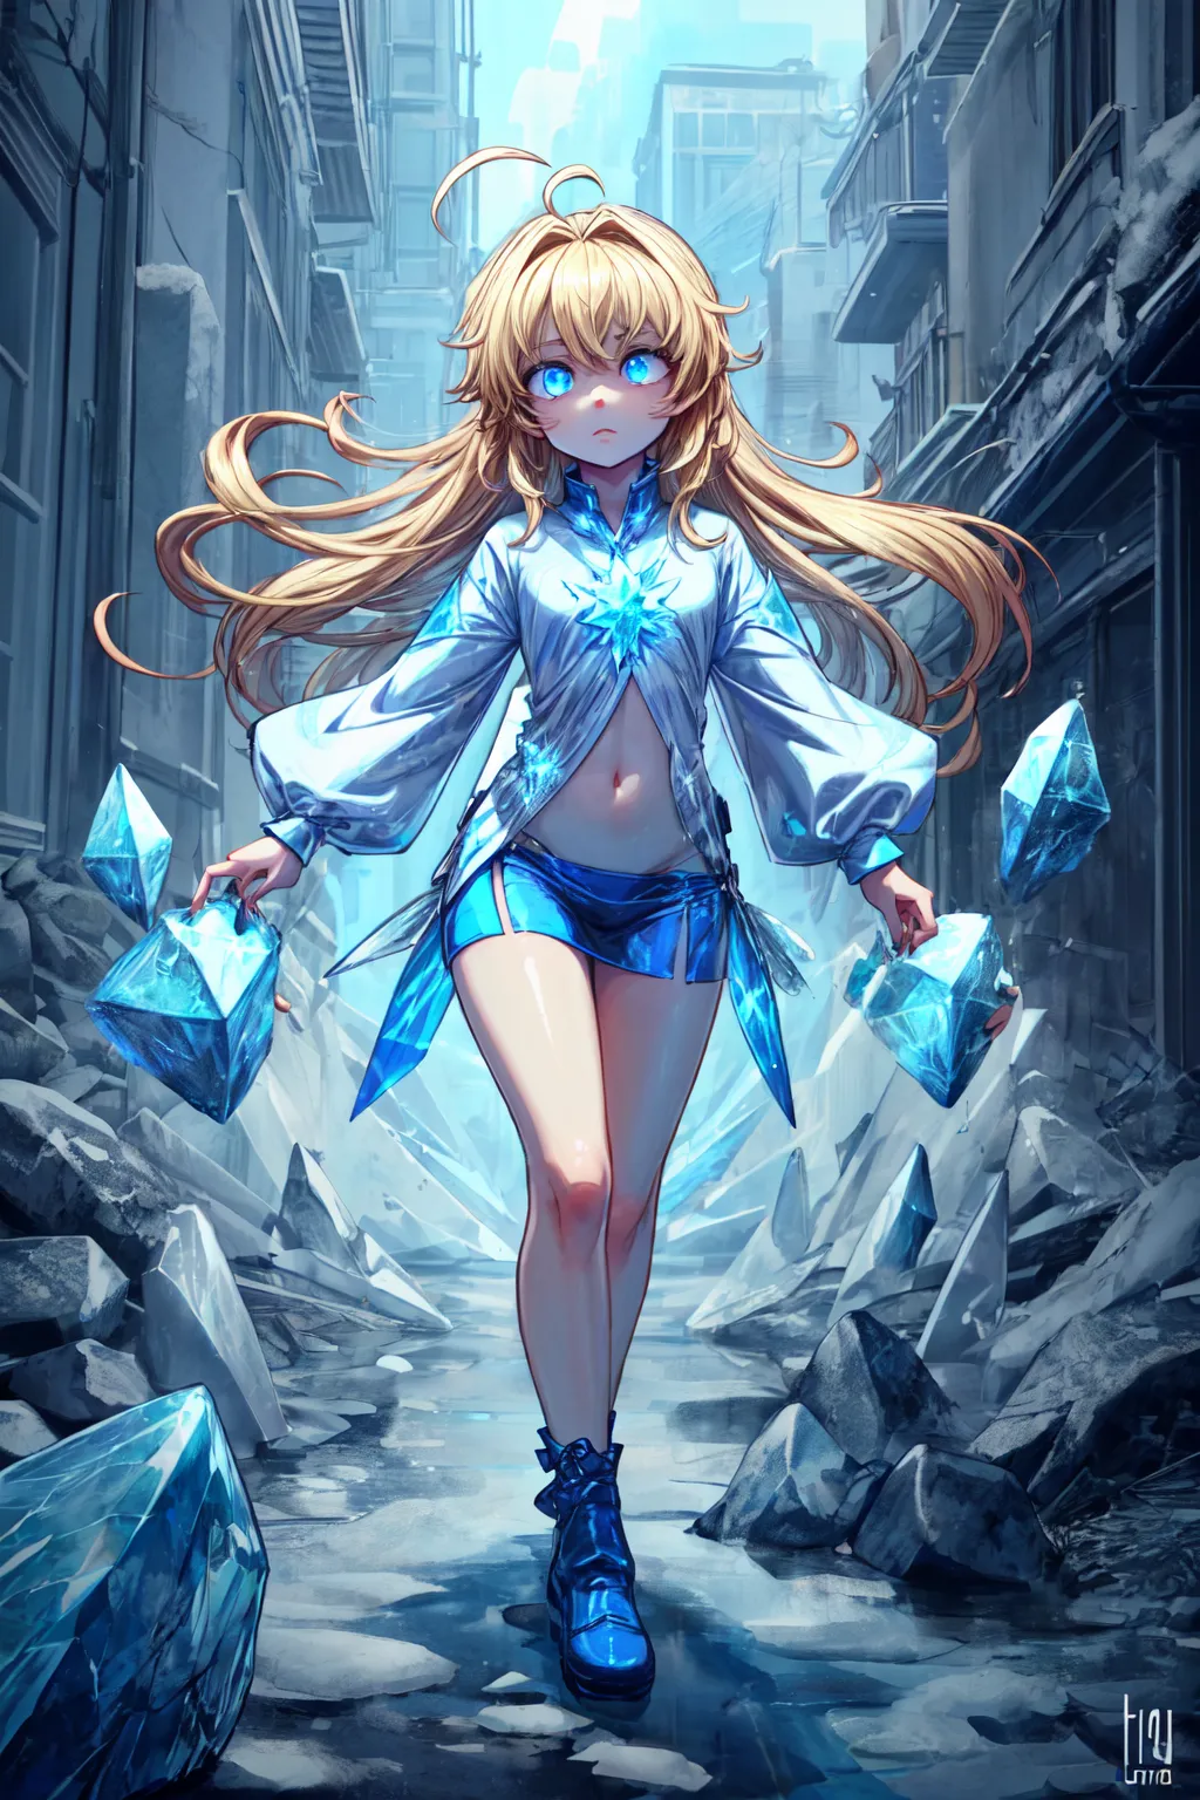 Character Change - Ice Elemental Change - Chilling Adventures image by slime77744784